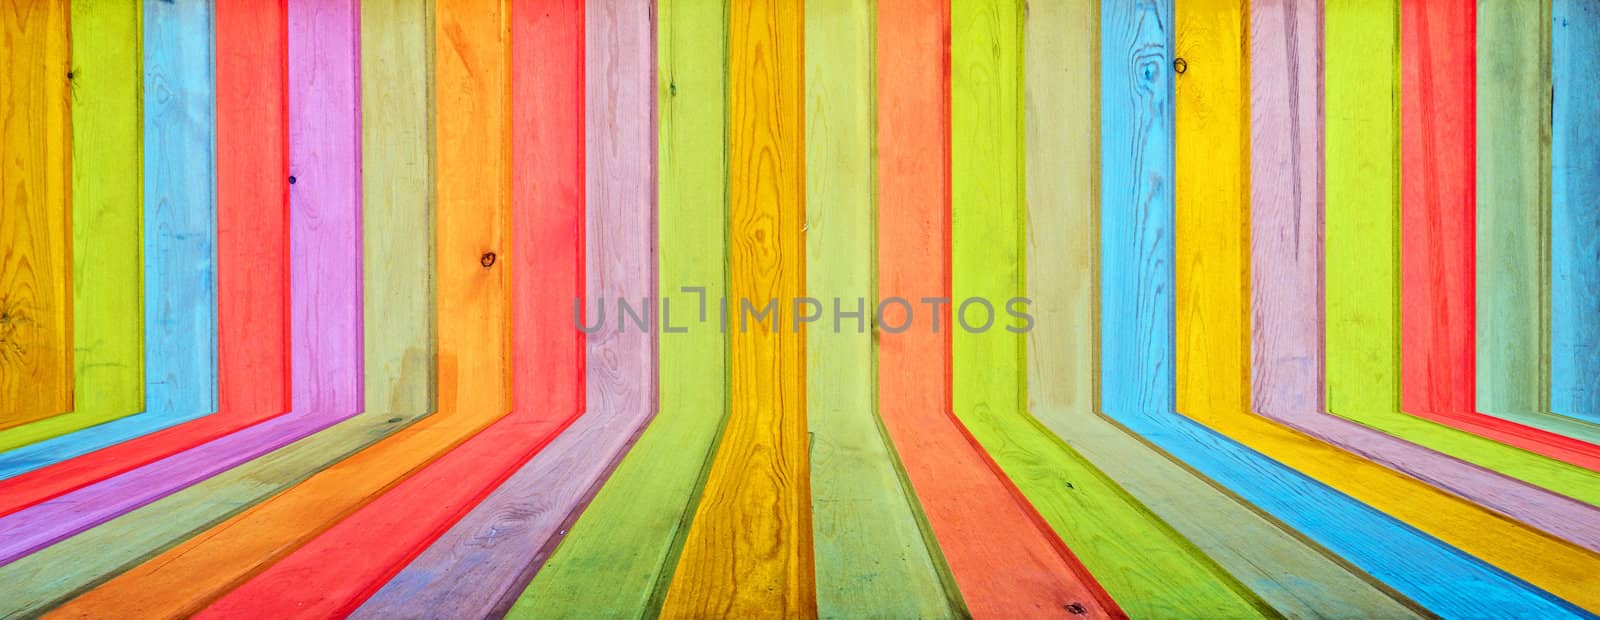 colorful wood background by inxti